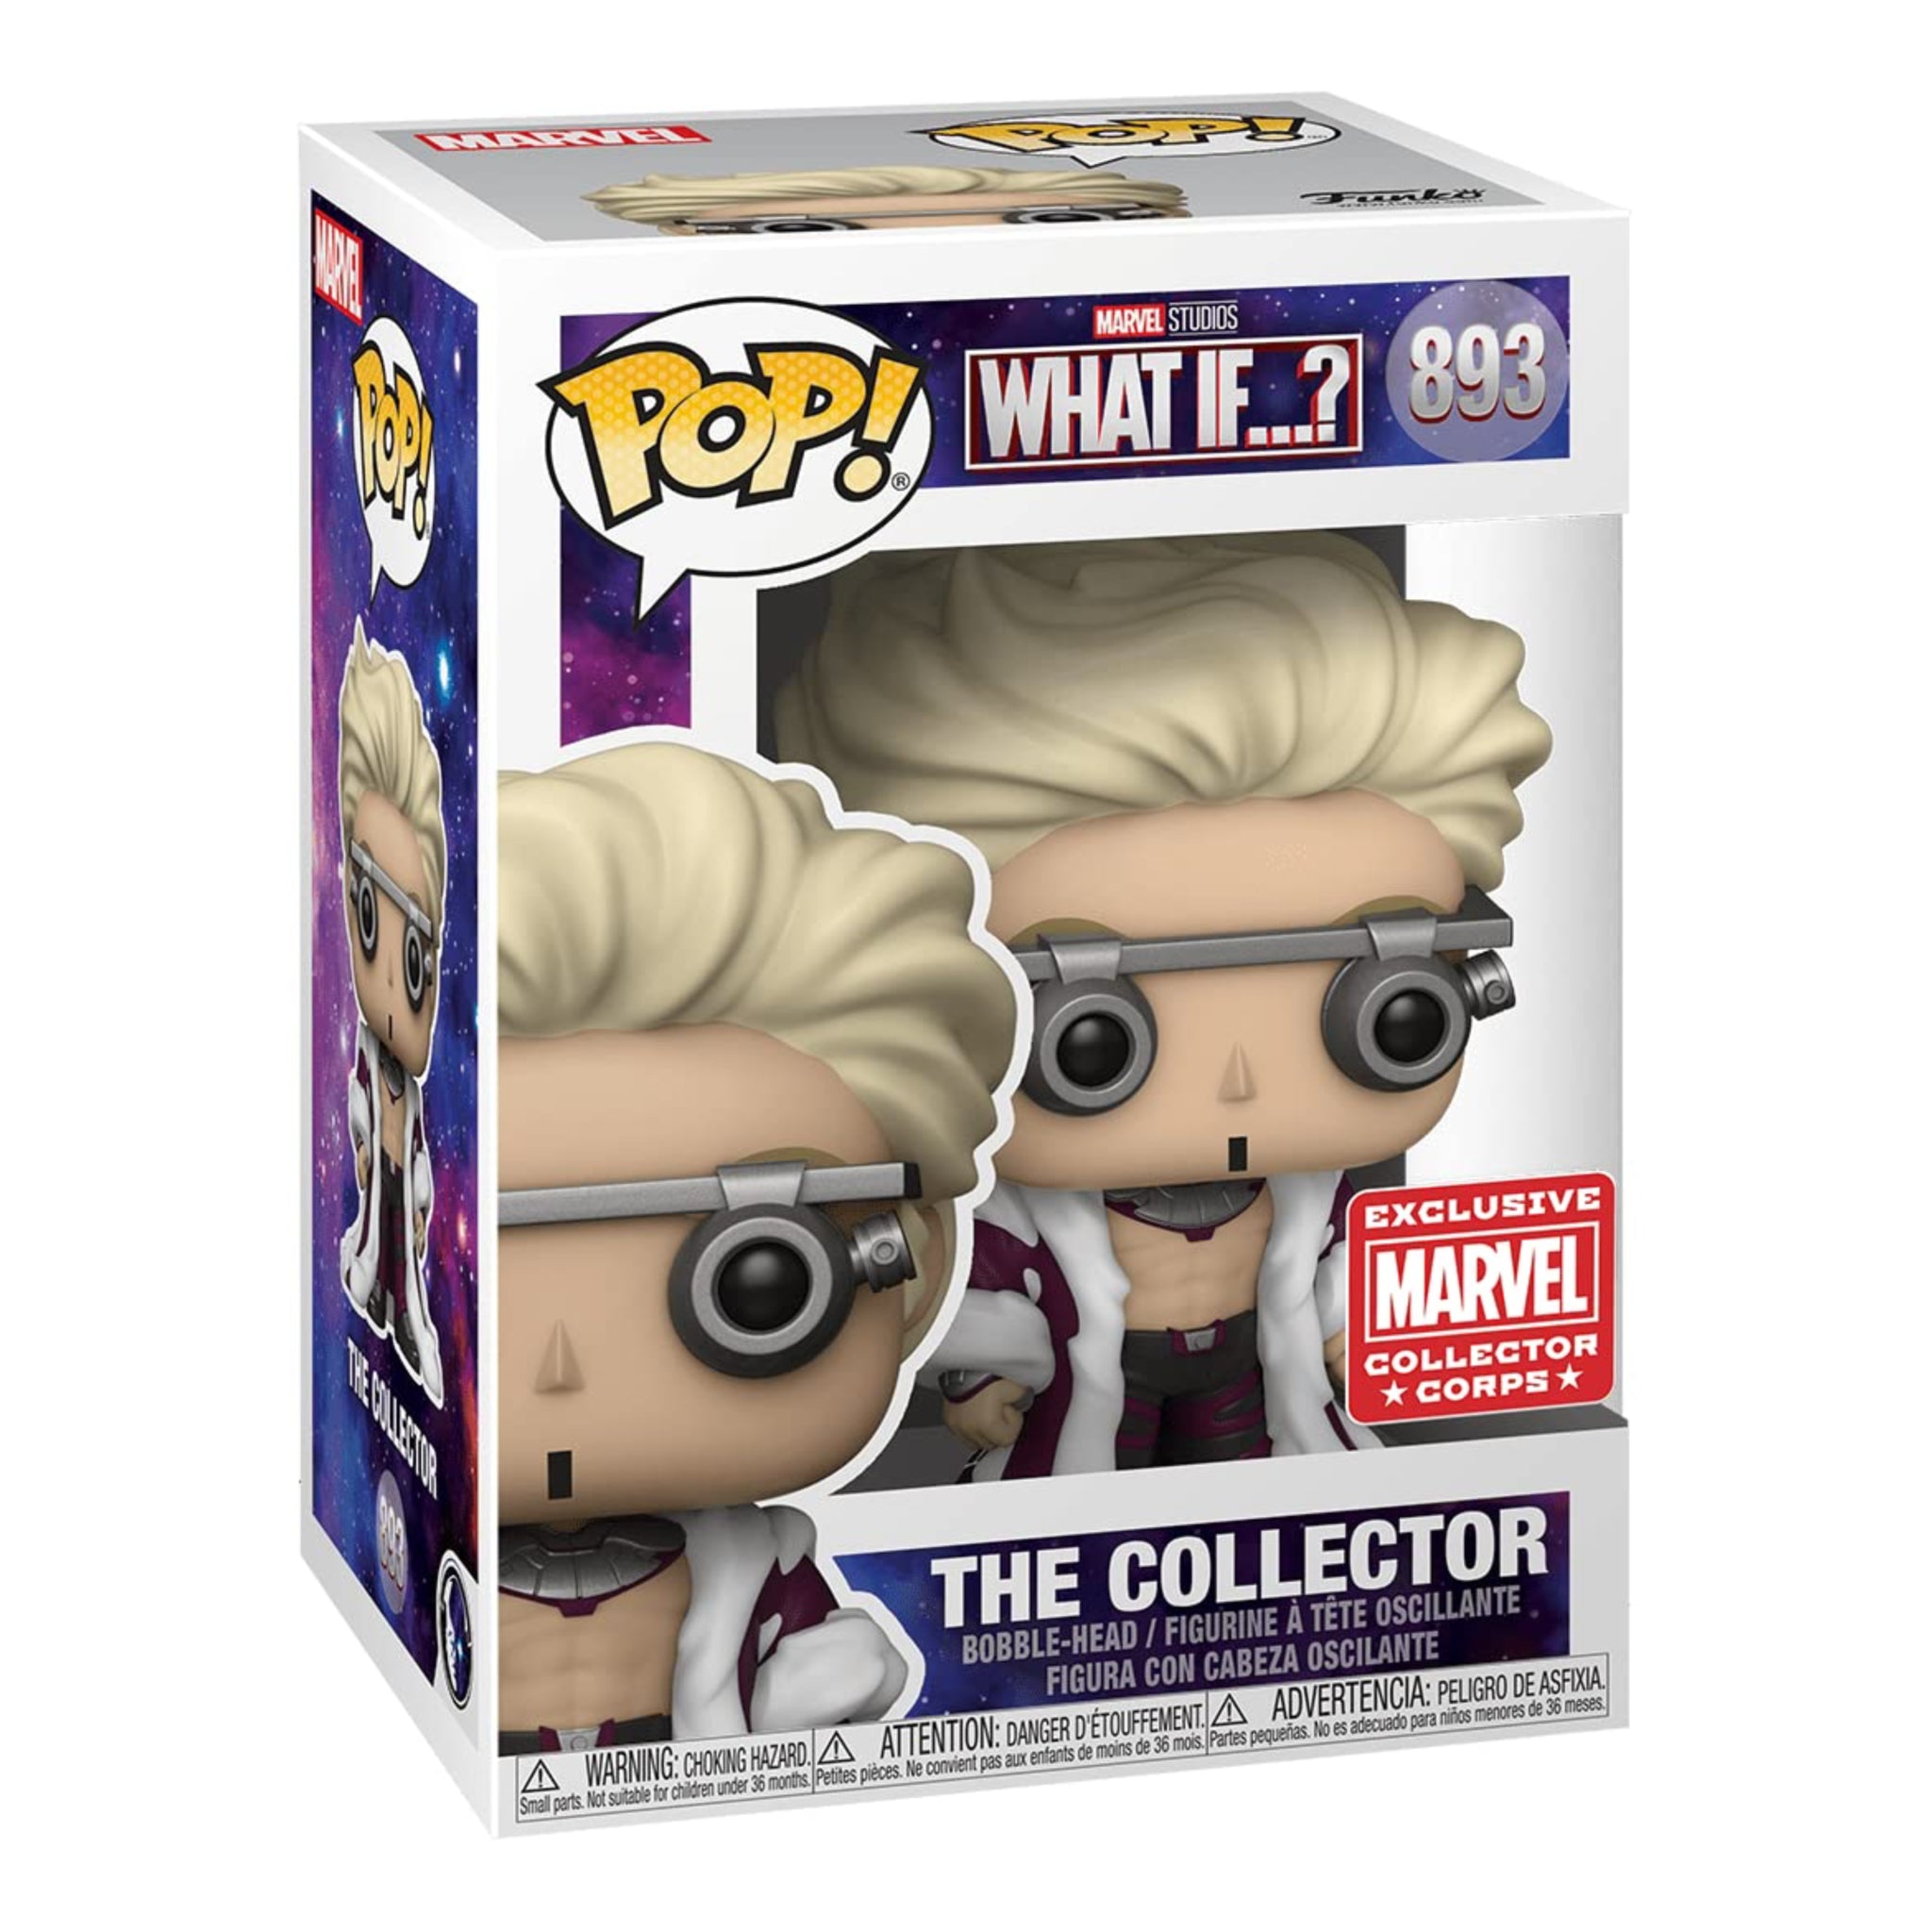 The Collector Funko Pop! MARVEL EXCLUSIVE